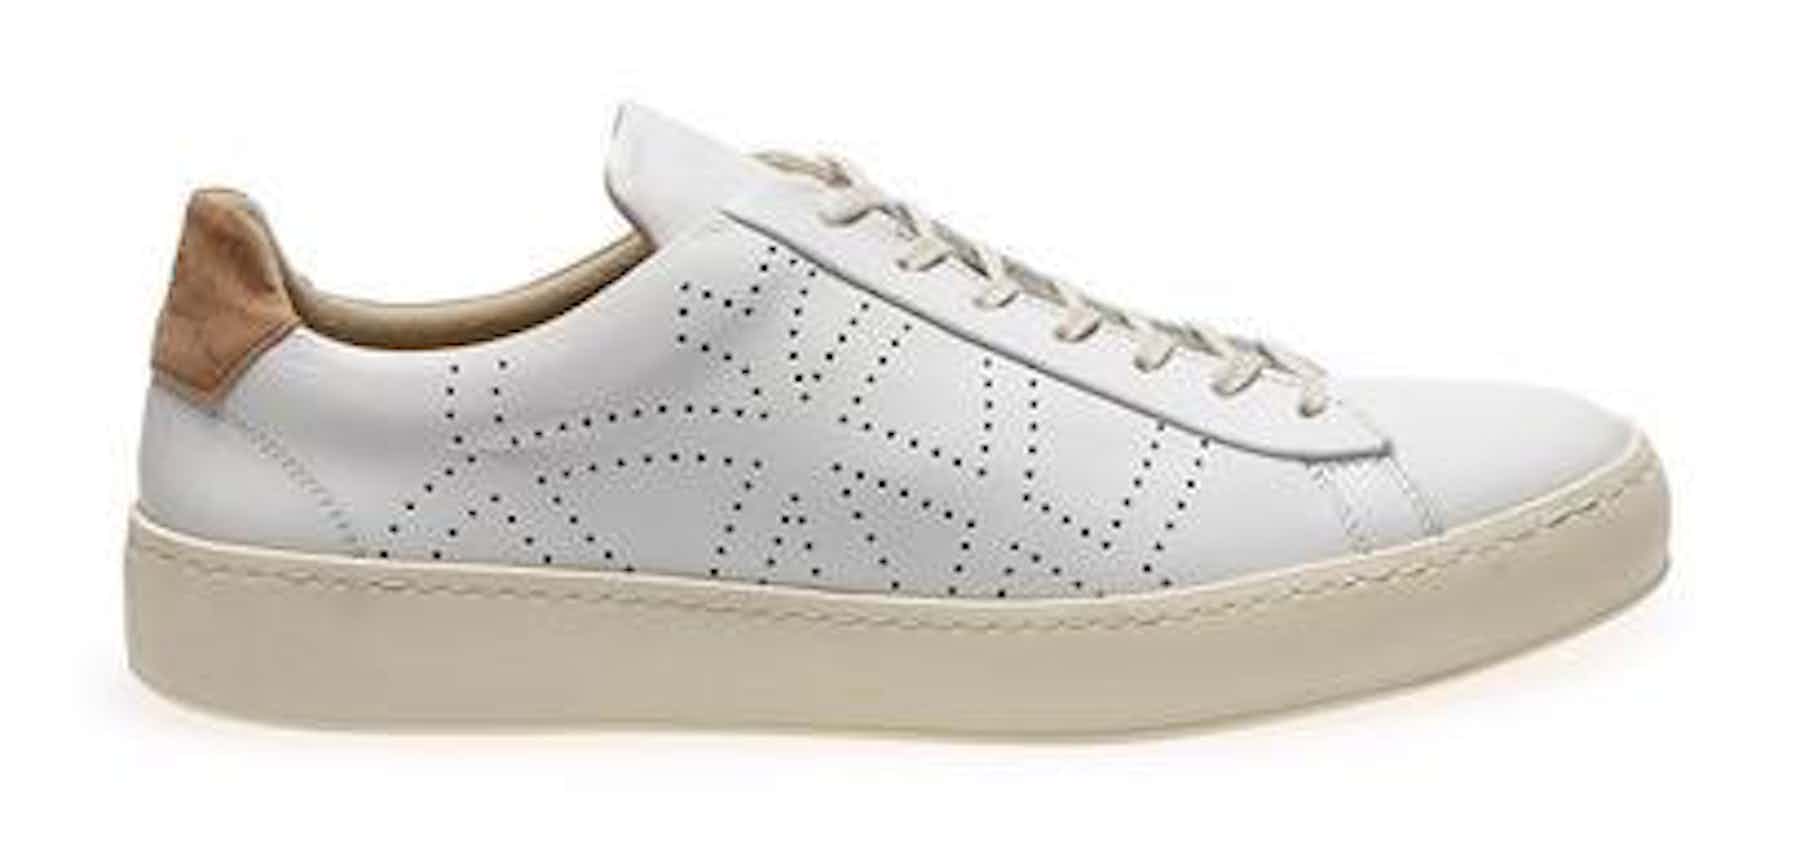 Sustainable shopping: how to rock white sneakers without eco-guilt